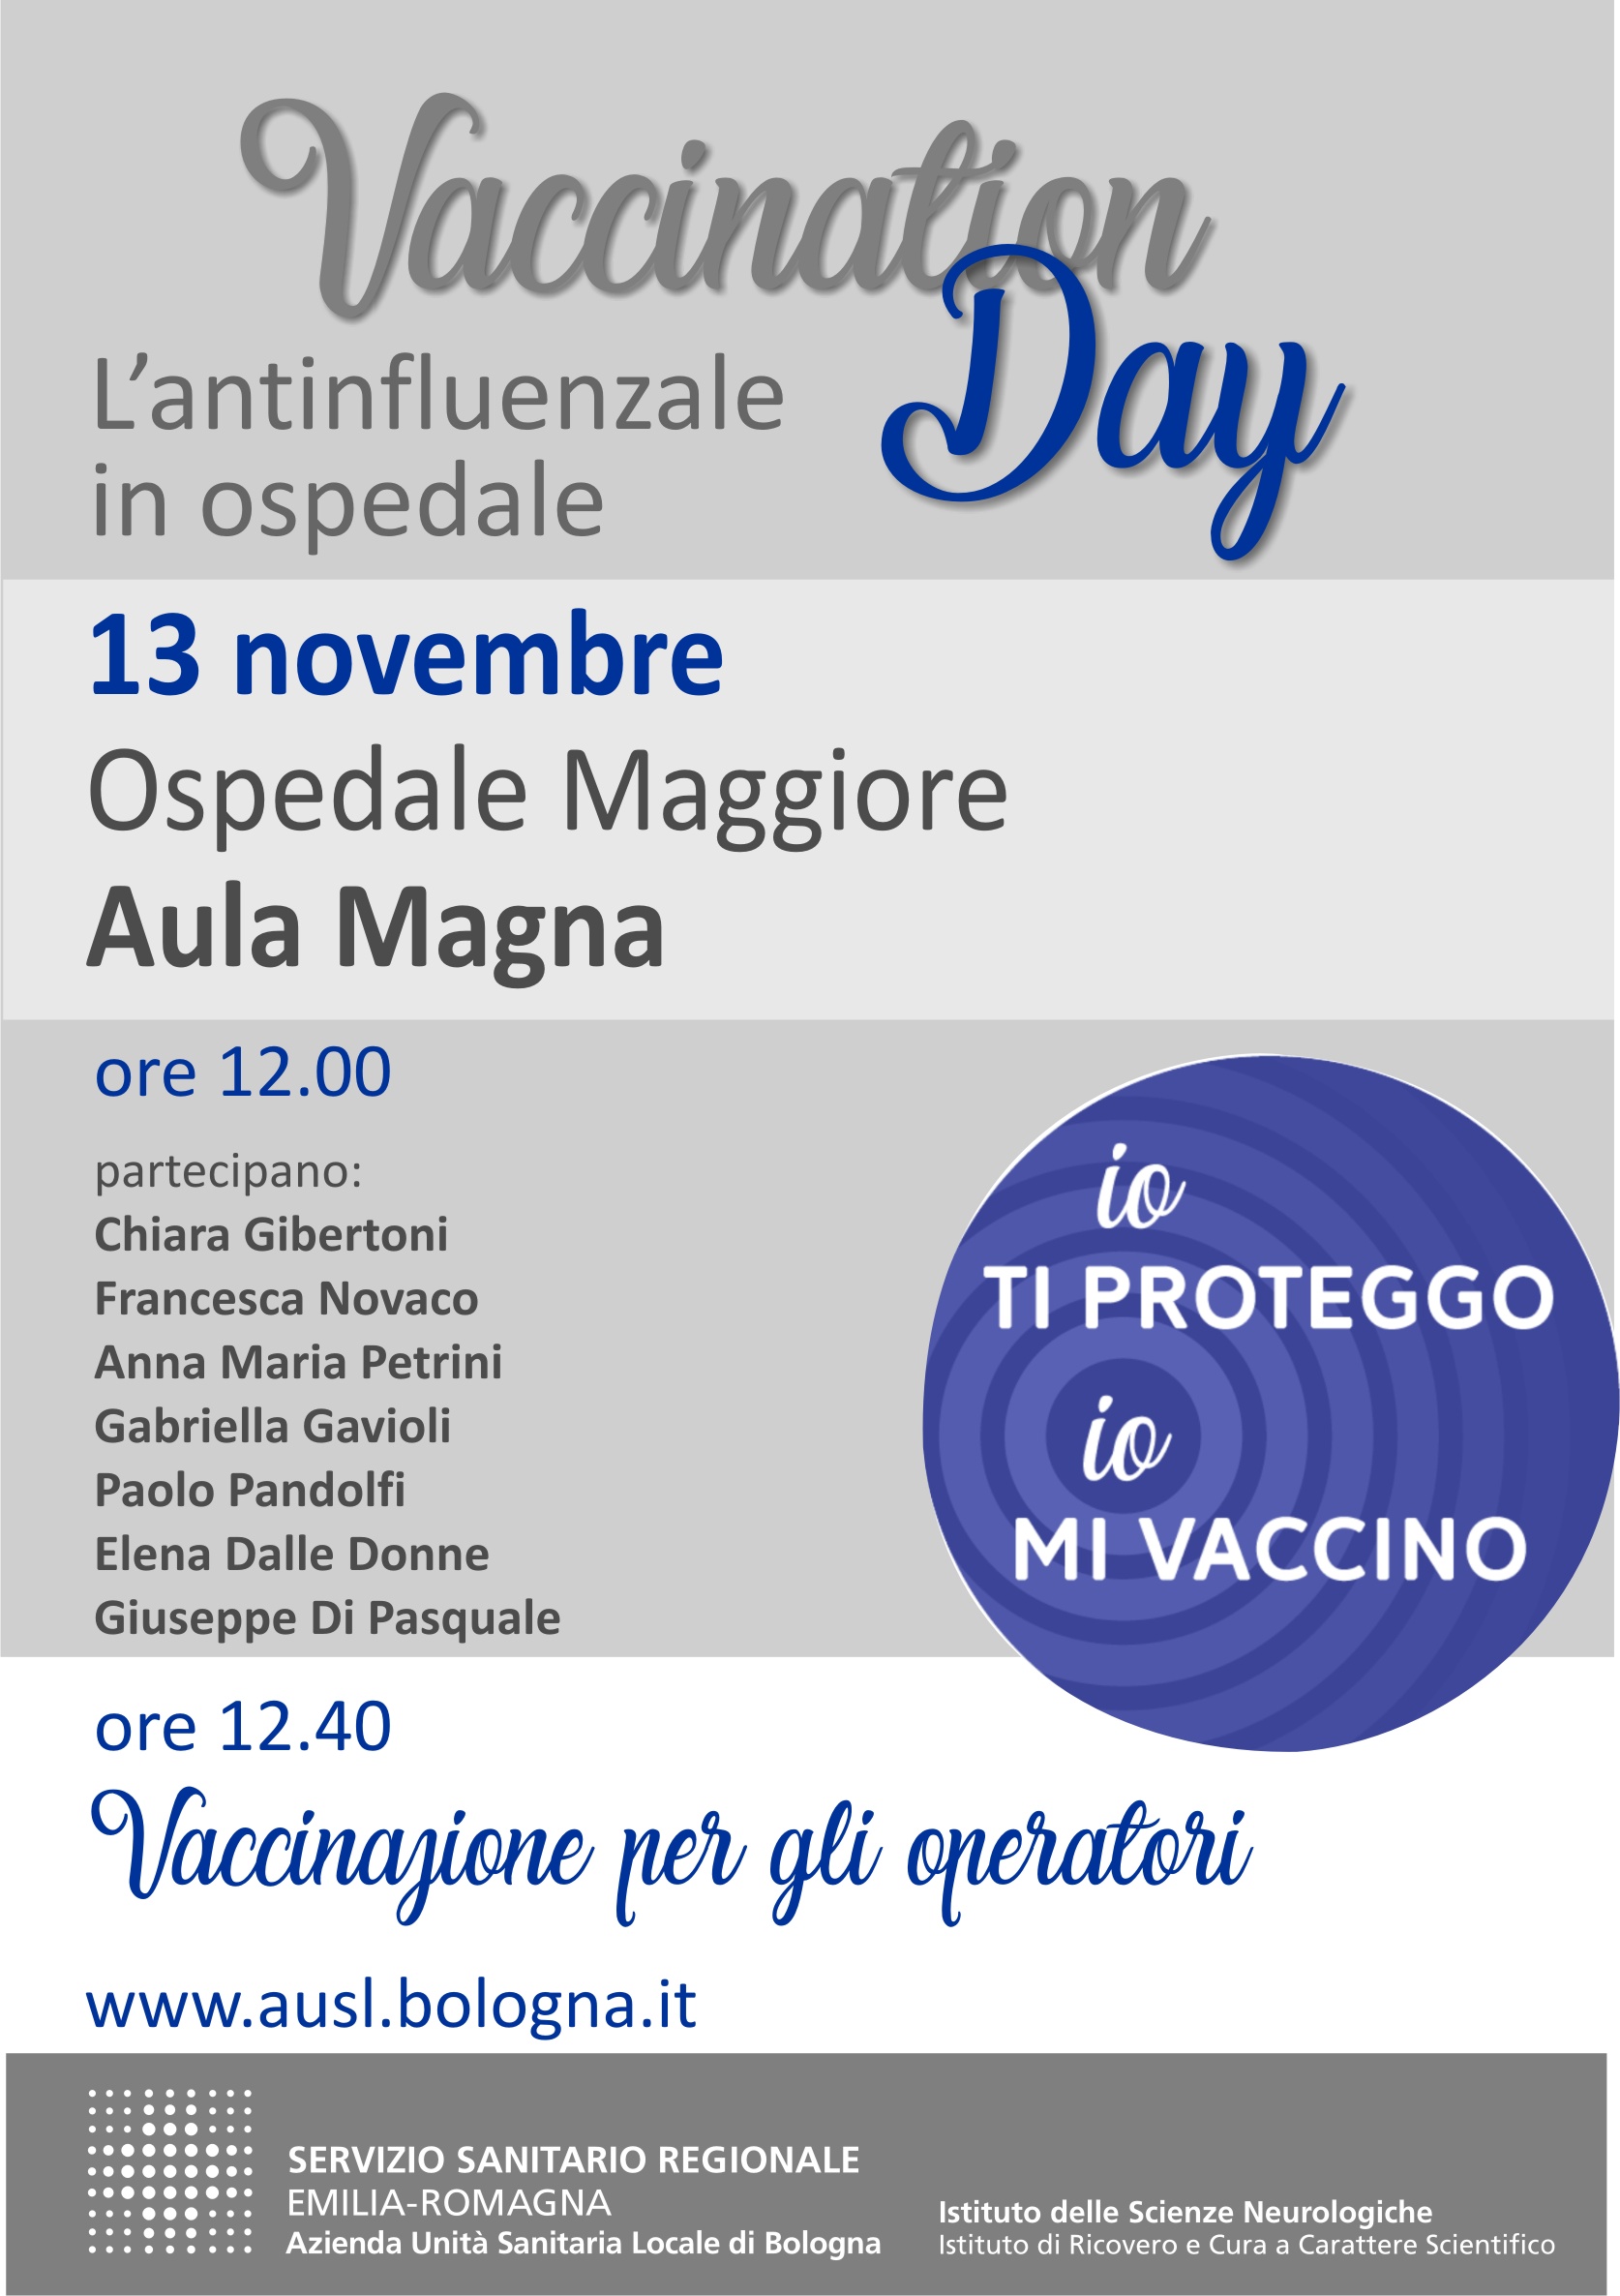 Vaccination Day - L'antinfluenzale in ospedale 